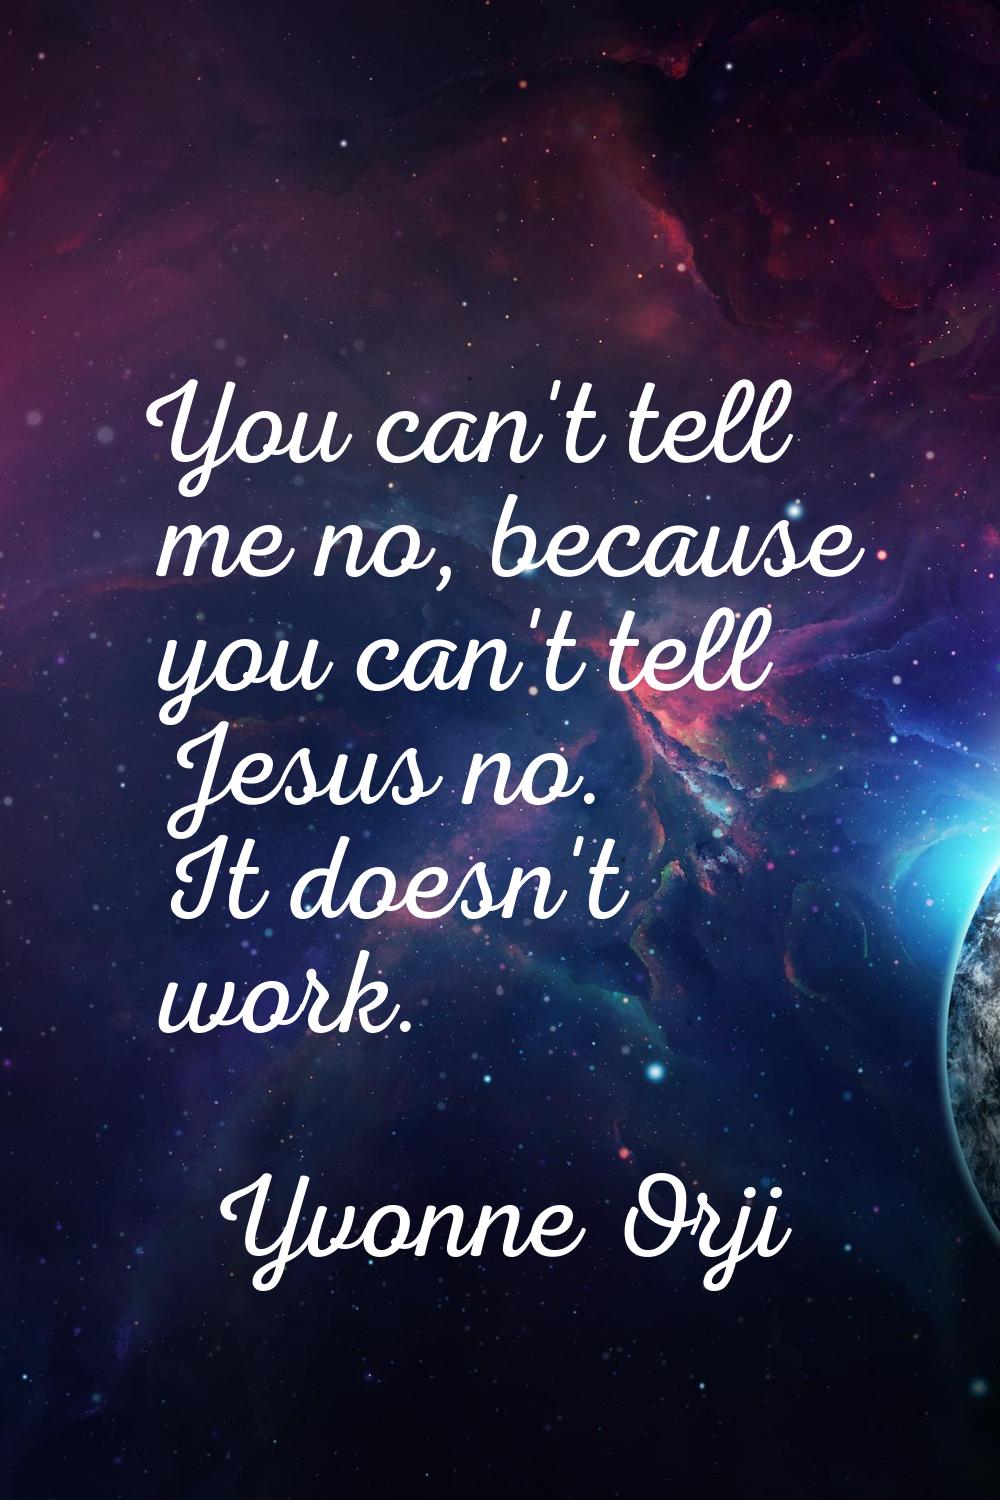 You can't tell me no, because you can't tell Jesus no. It doesn't work.